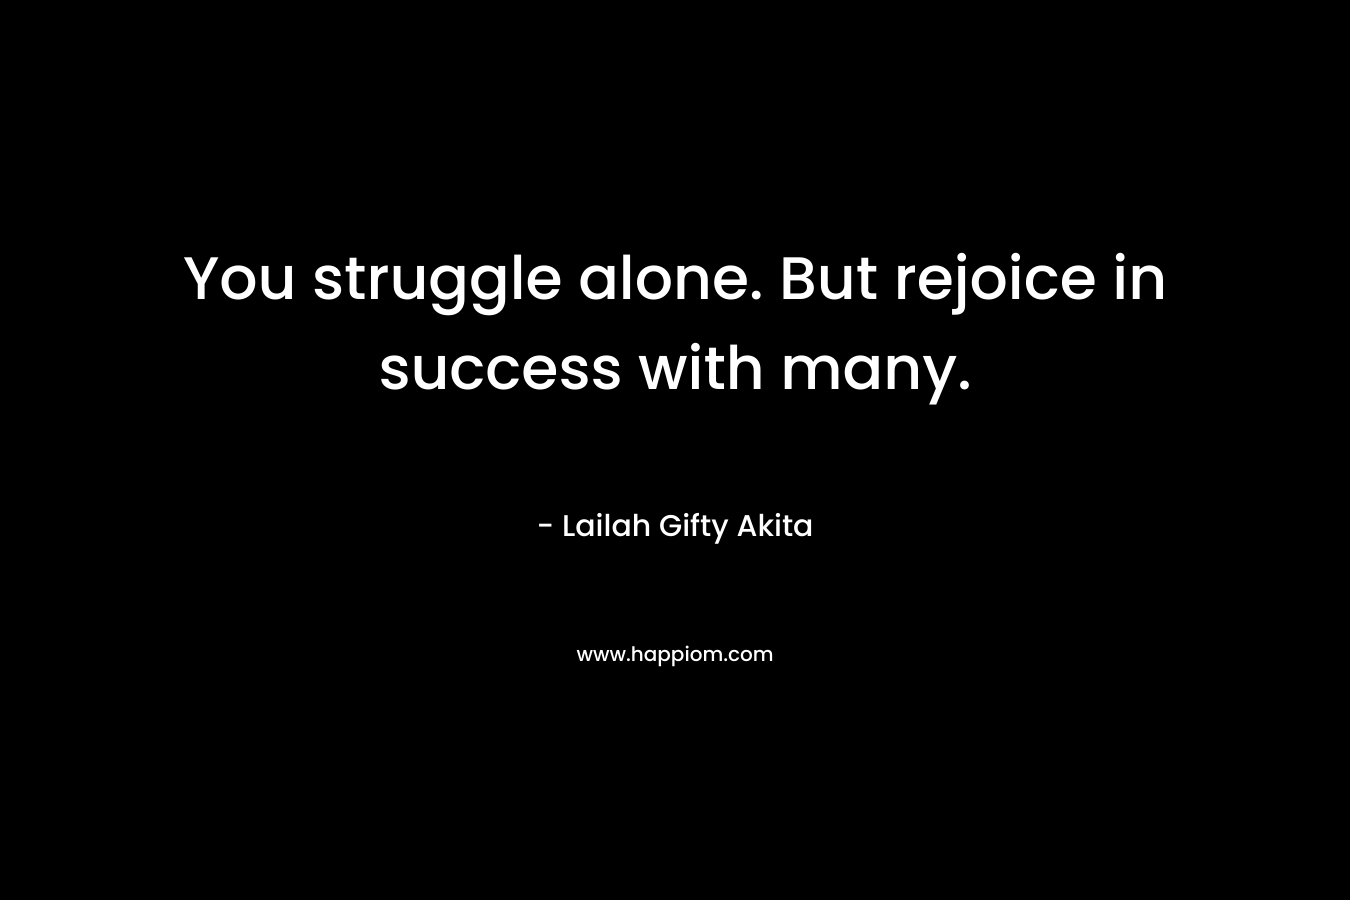 You struggle alone. But rejoice in success with many.